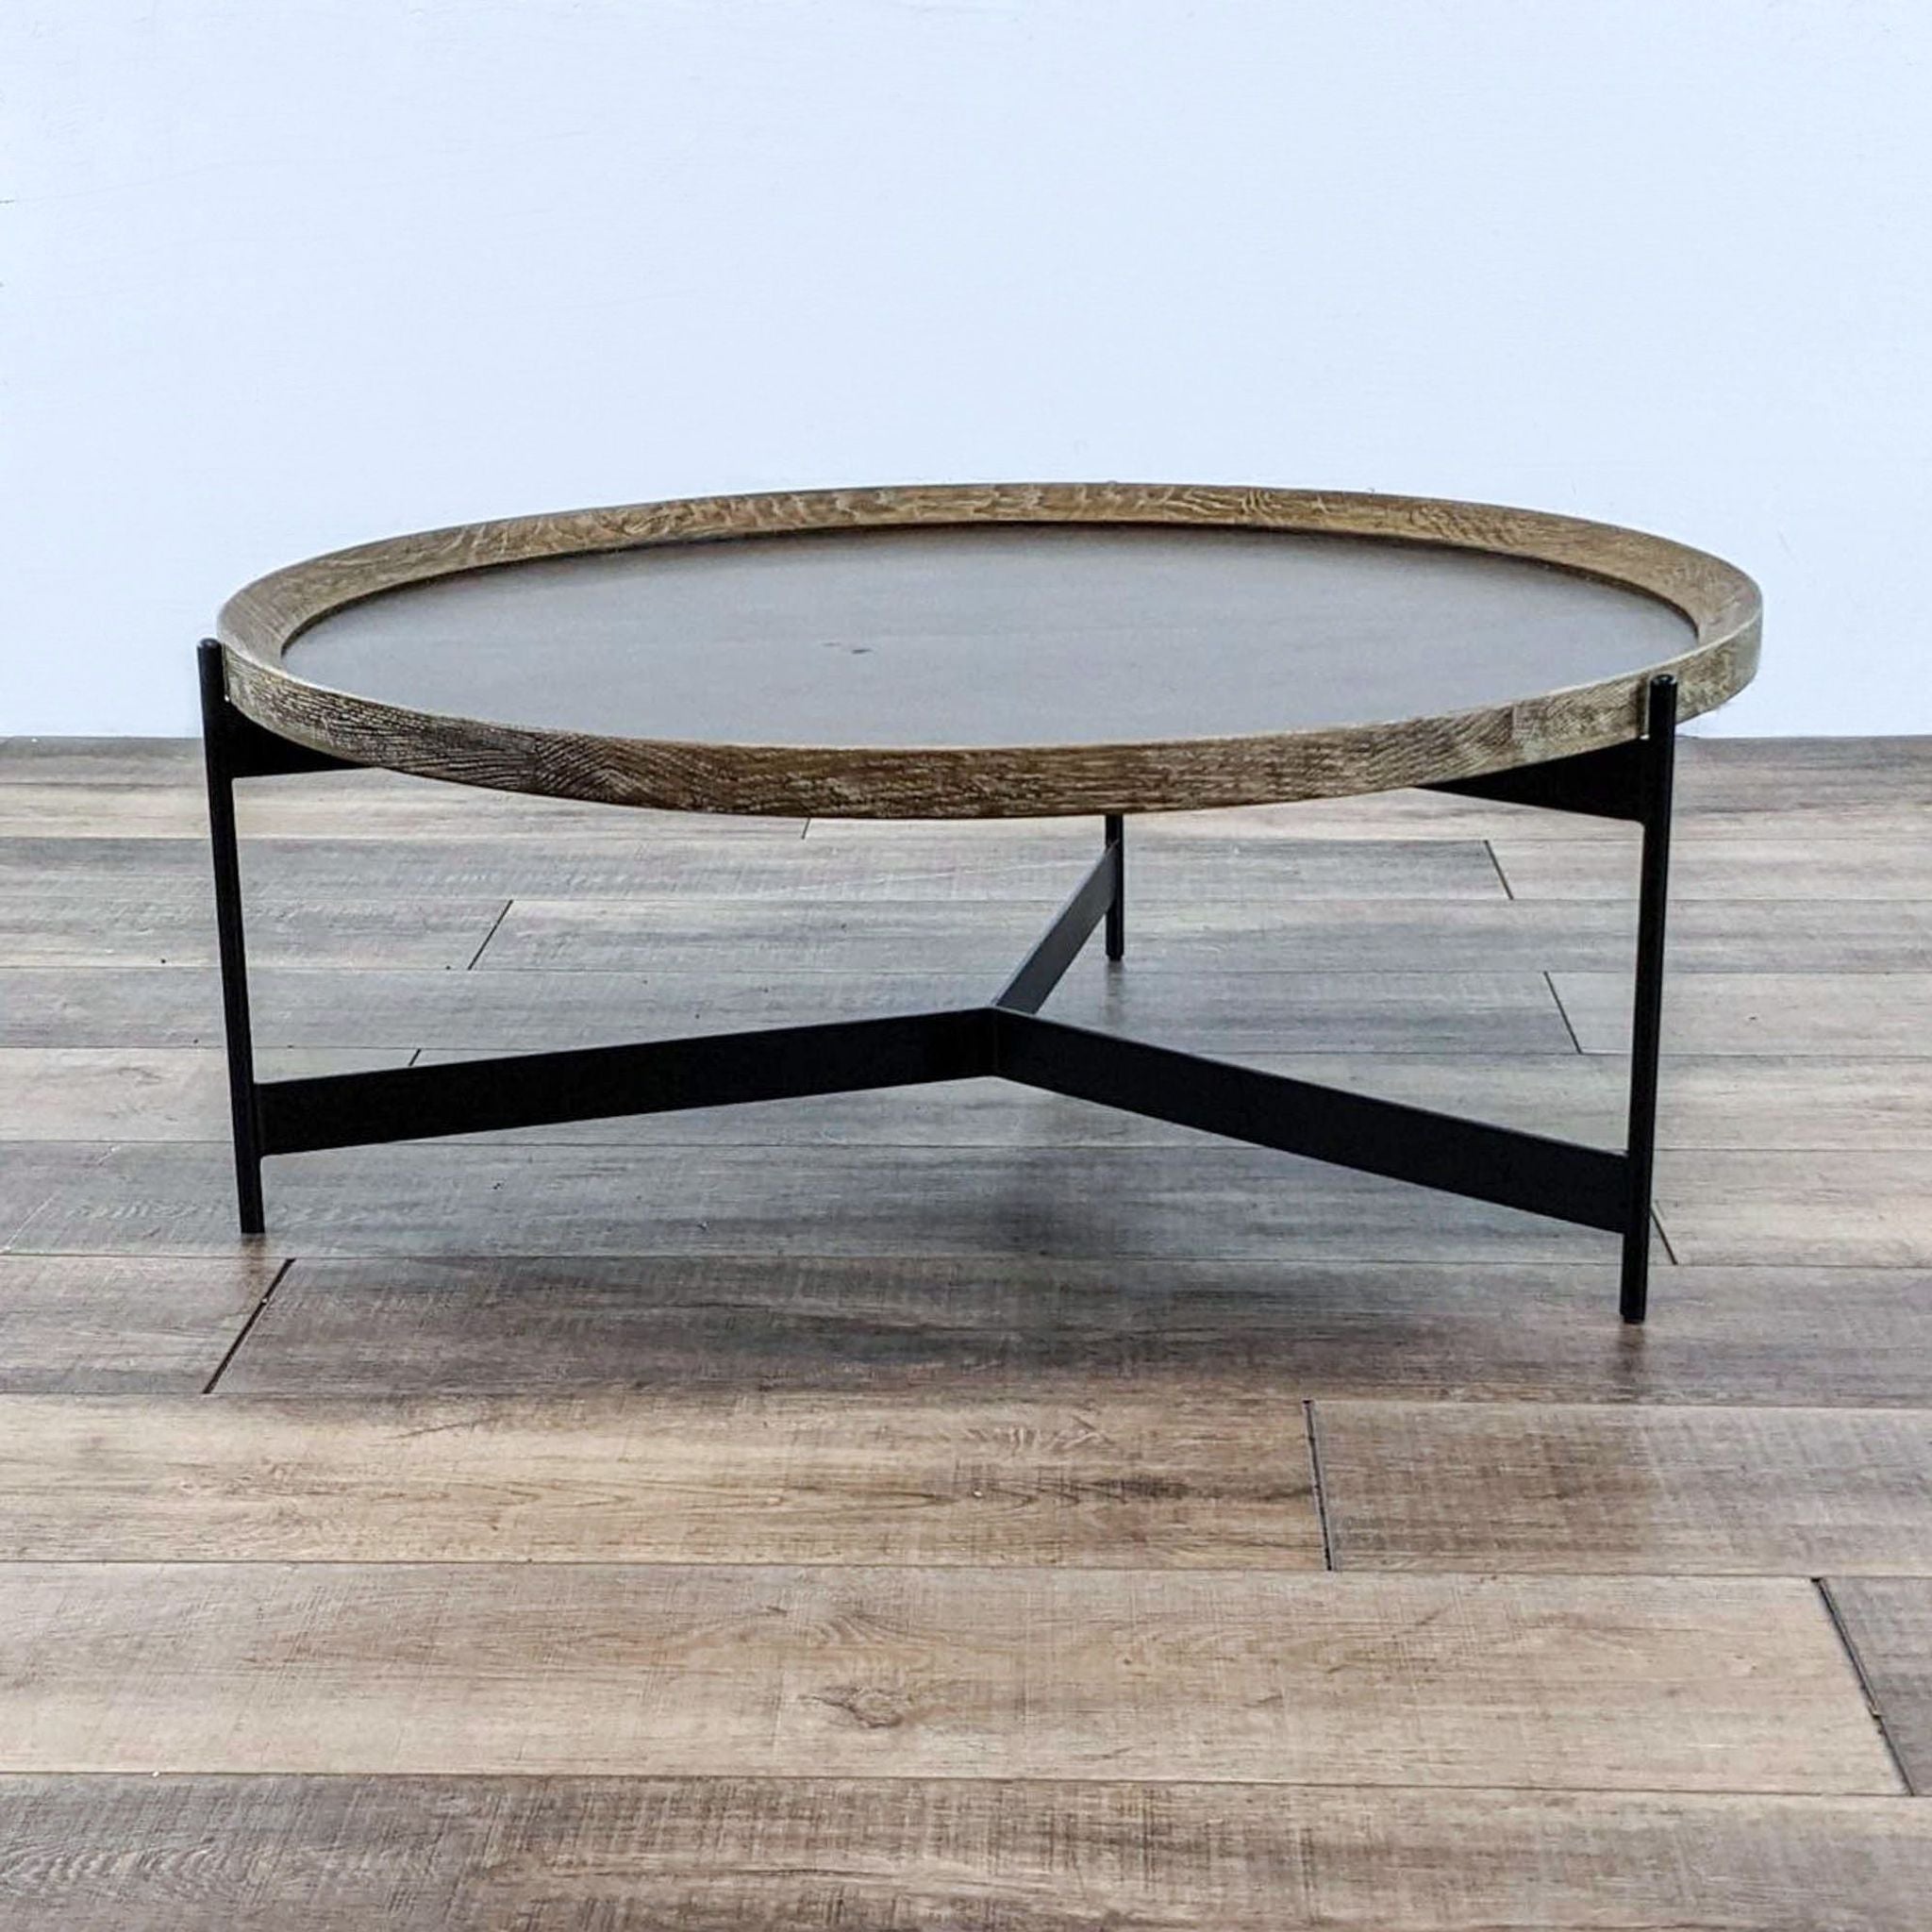 Round Pottery Barn coffee table with textured wooden top and angled black metal legs on a wooden floor.